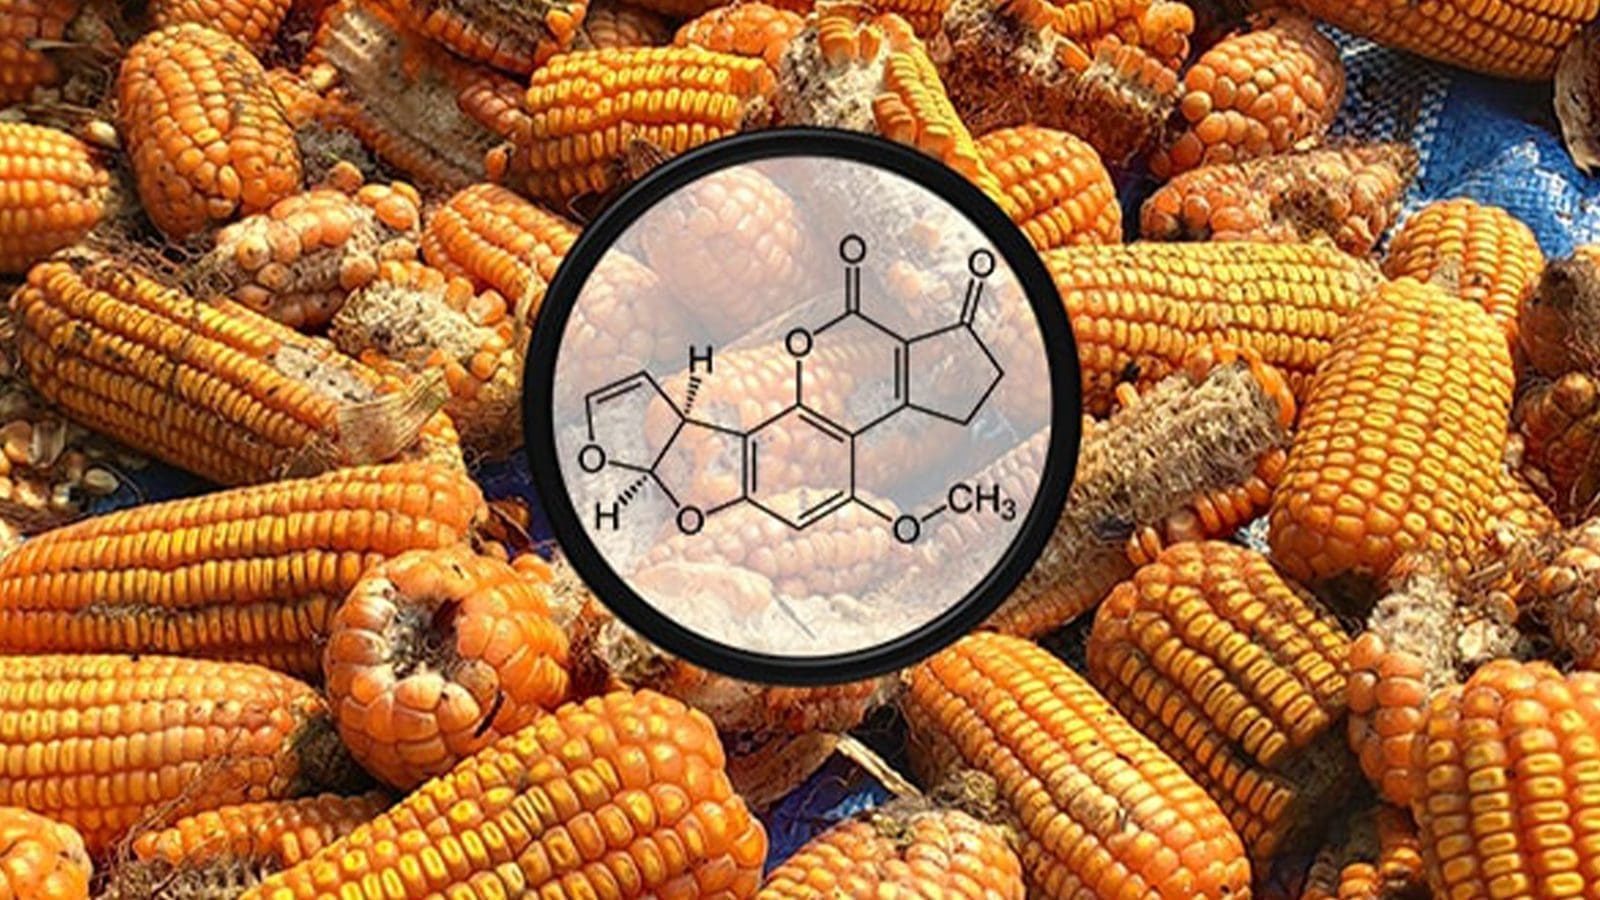 Malawian agri-experts plan to create aflatoxin awareness among farmers after study finds low knowledge